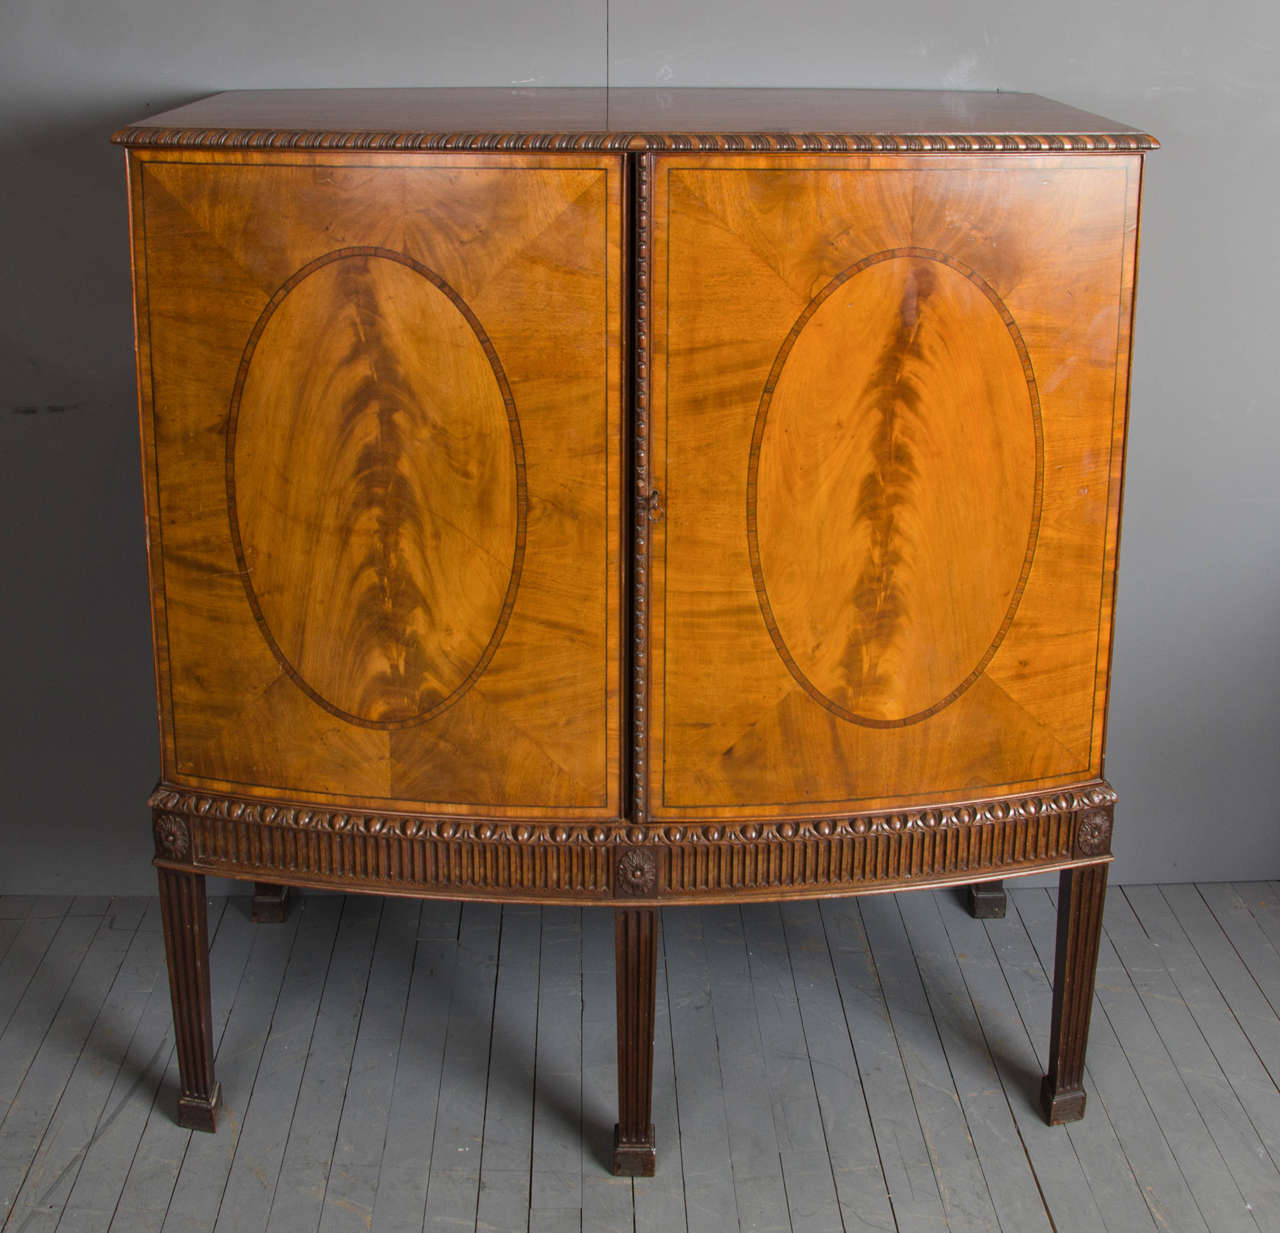 Mahogany Sheraton Revival style cabinet by Howard and Sons. This very handsome and well-proportioned cabinet was made by Howard and Sons, a well-known cabinet maker of the period. The cabinet features a two-door bow front and is supported on five